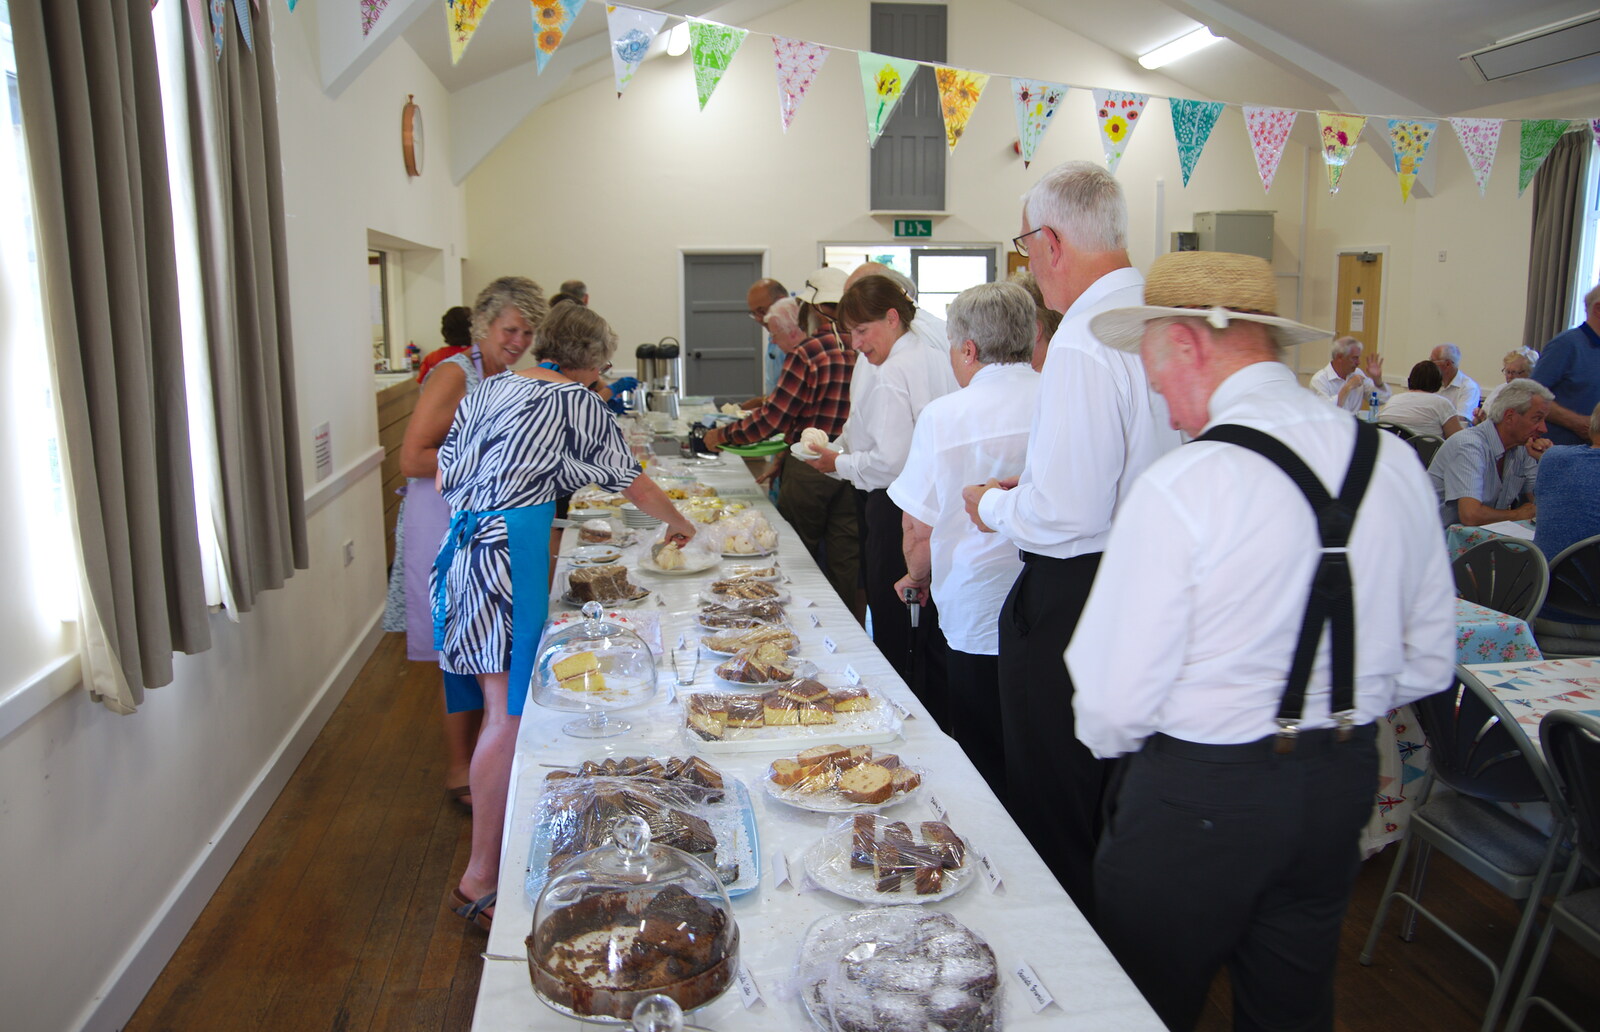 The band queues up for some tea and cake from The Gislingham Silver Band at Walsham Le Willows, Suffolk - 26th August 2019